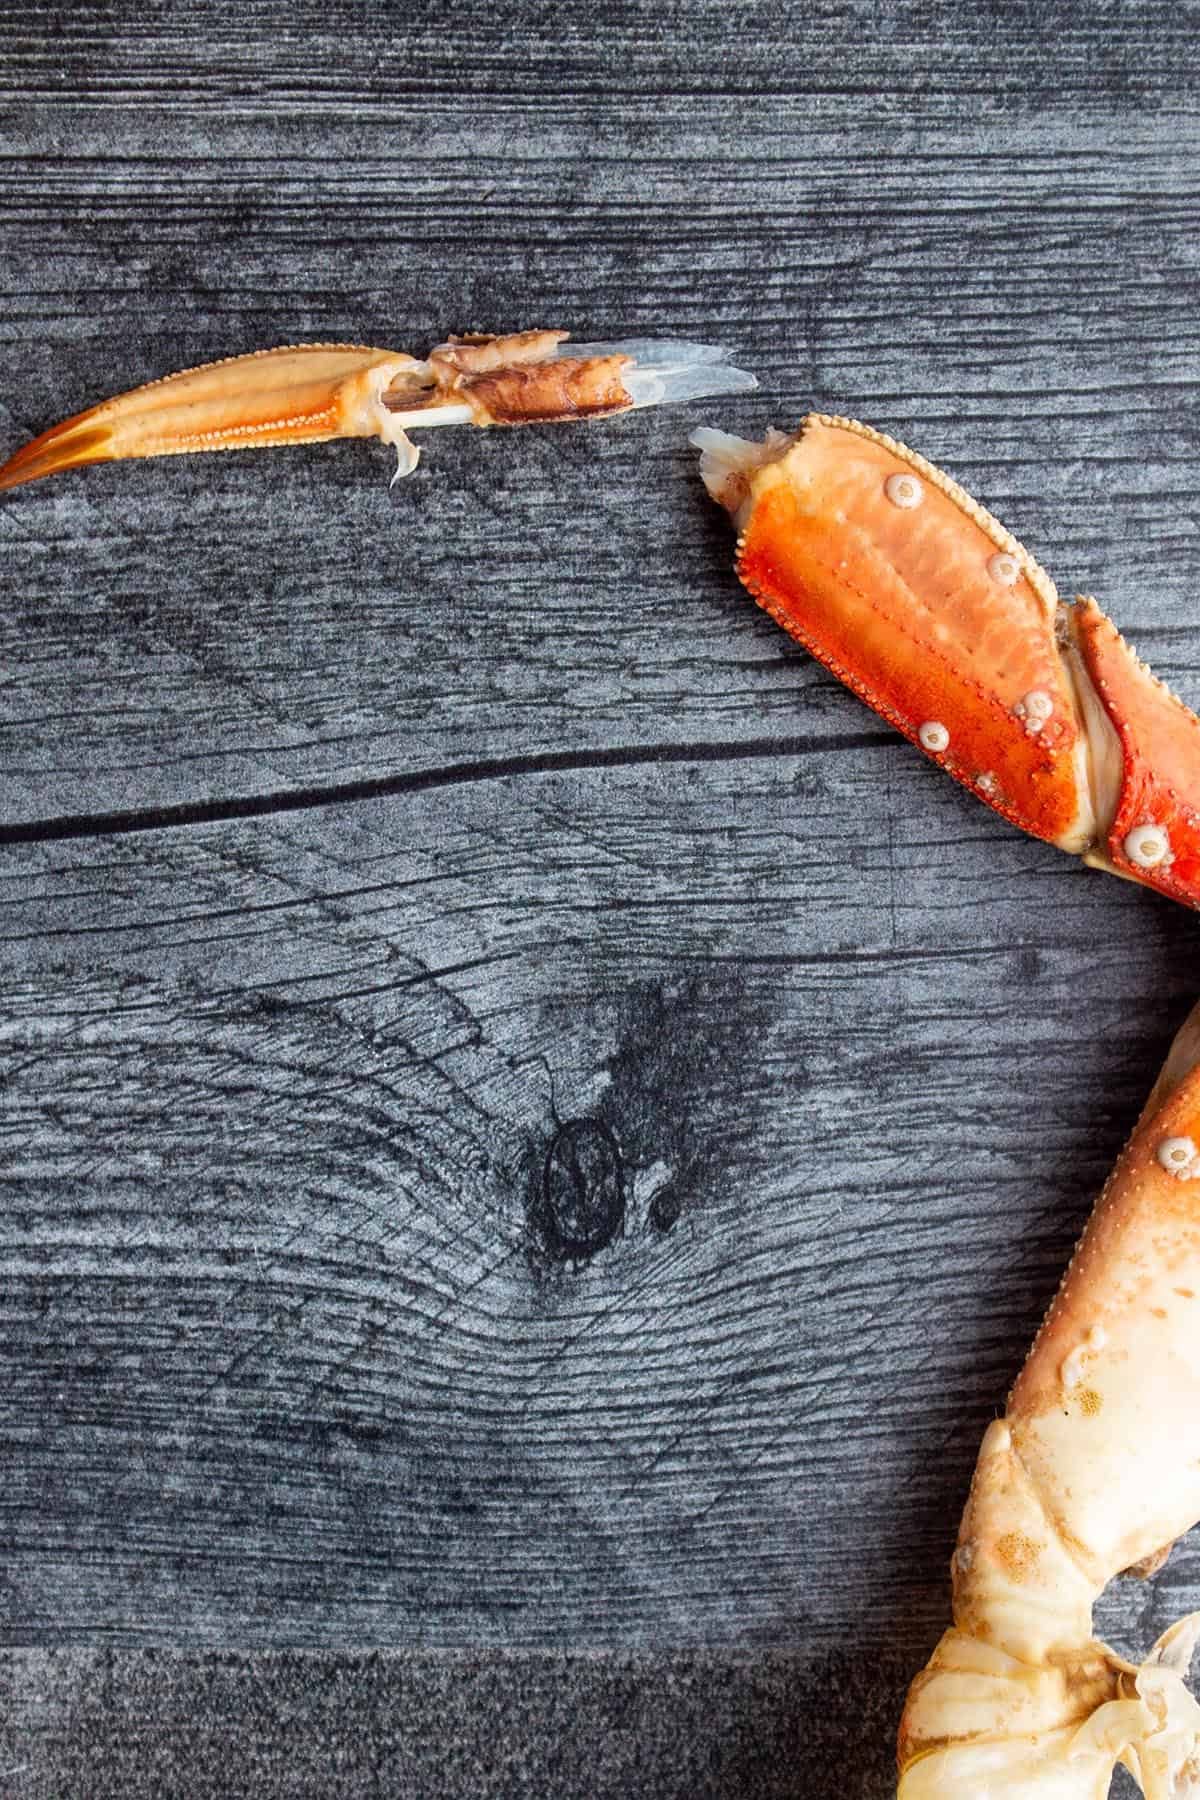 The tip of a crab leg being removed.